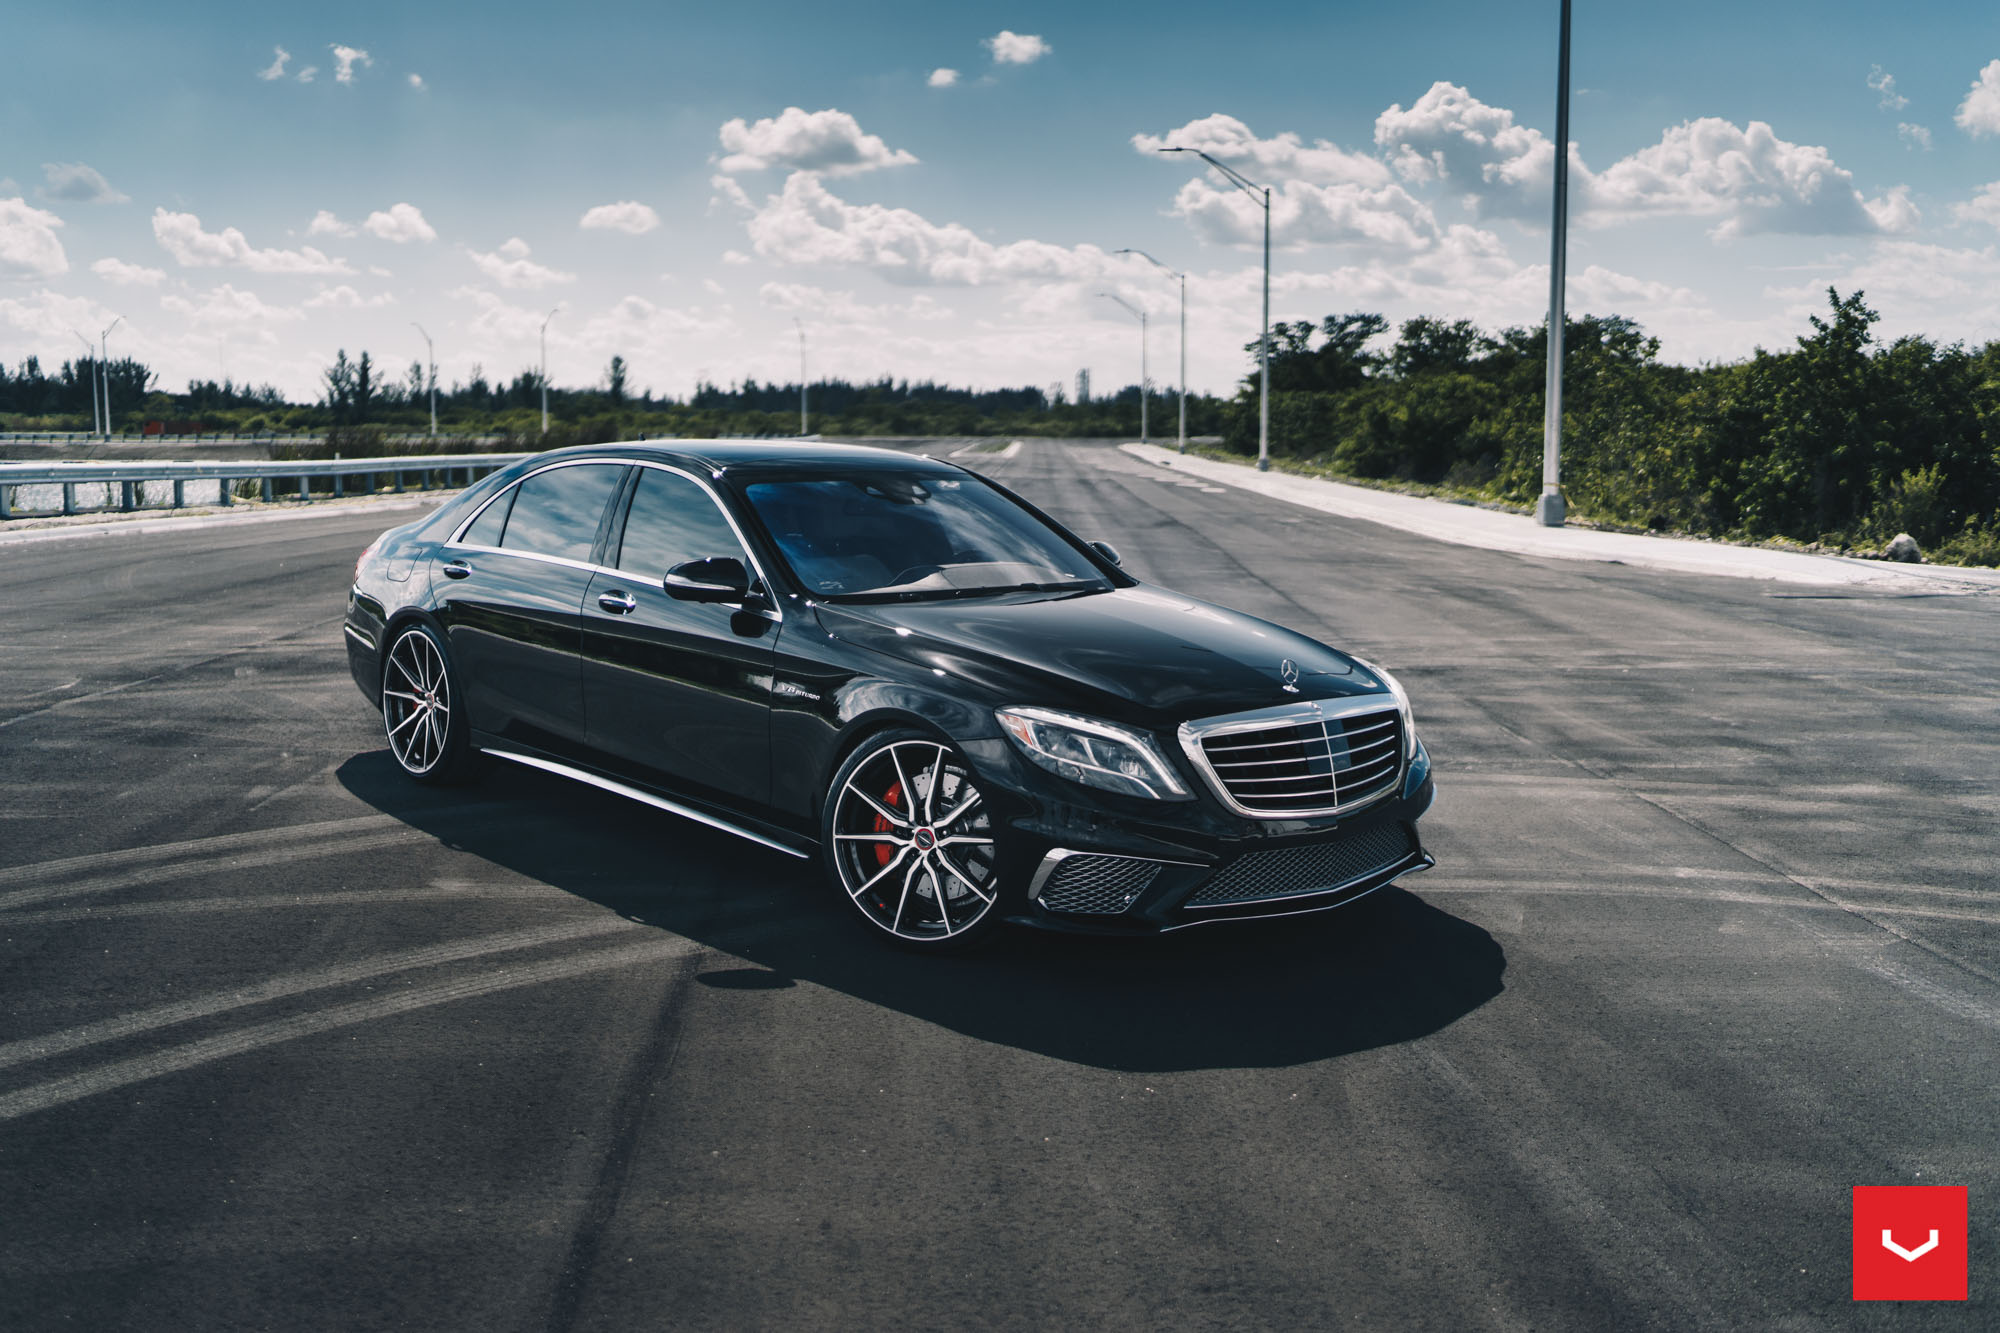 S класс amg. Mercedes s class w222 AMG 63. Mercedes Benz s63 w222. S63 AMG w222. Мерседес Бенц w222 s63 AMG.